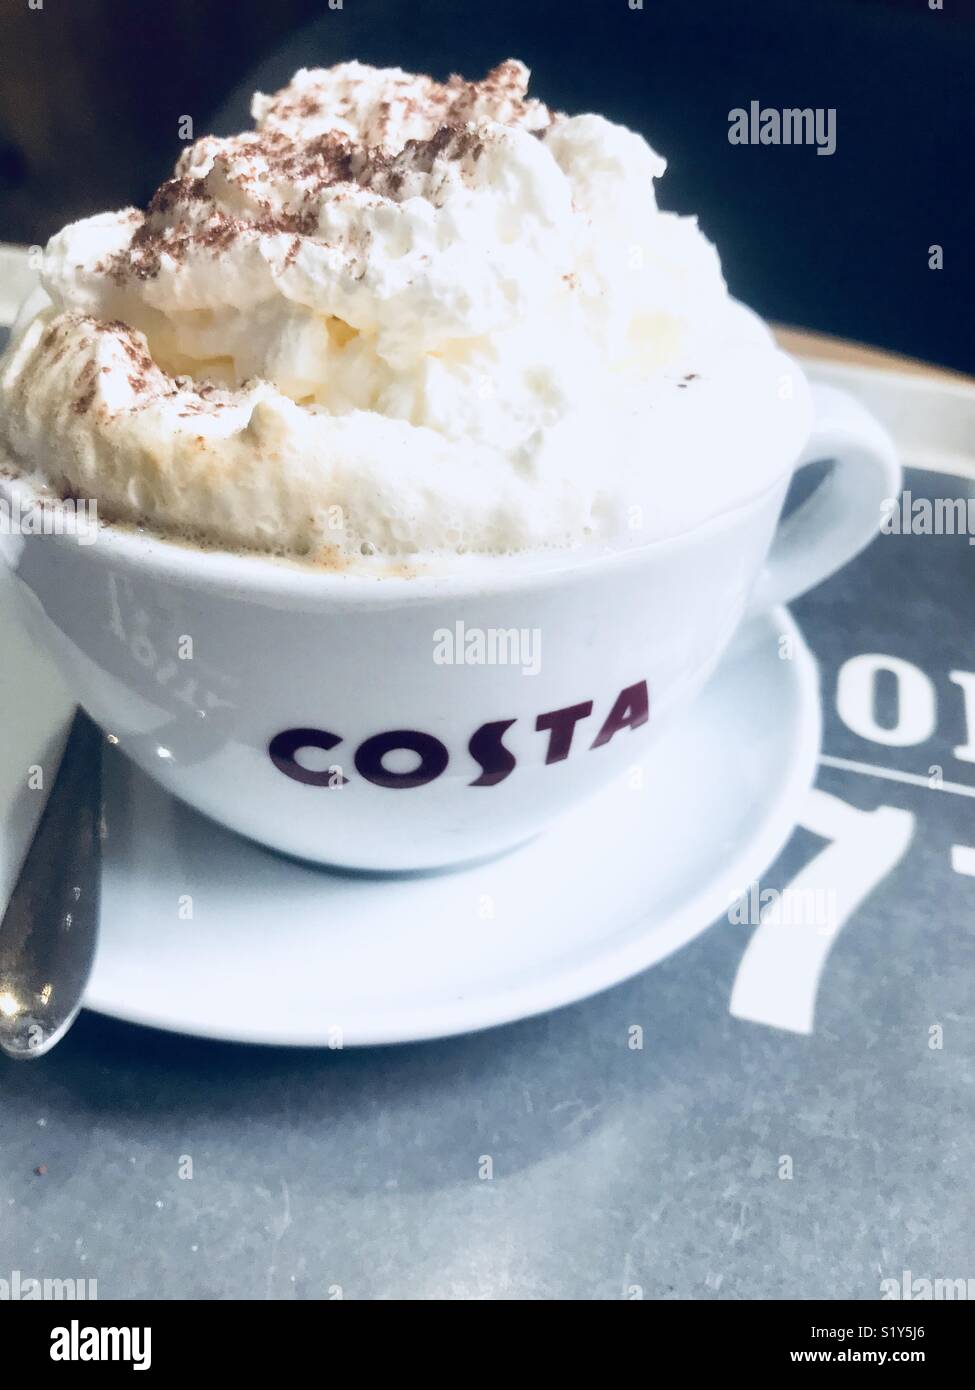 Costa coffee cappuccino with whipped cream Stock Photo